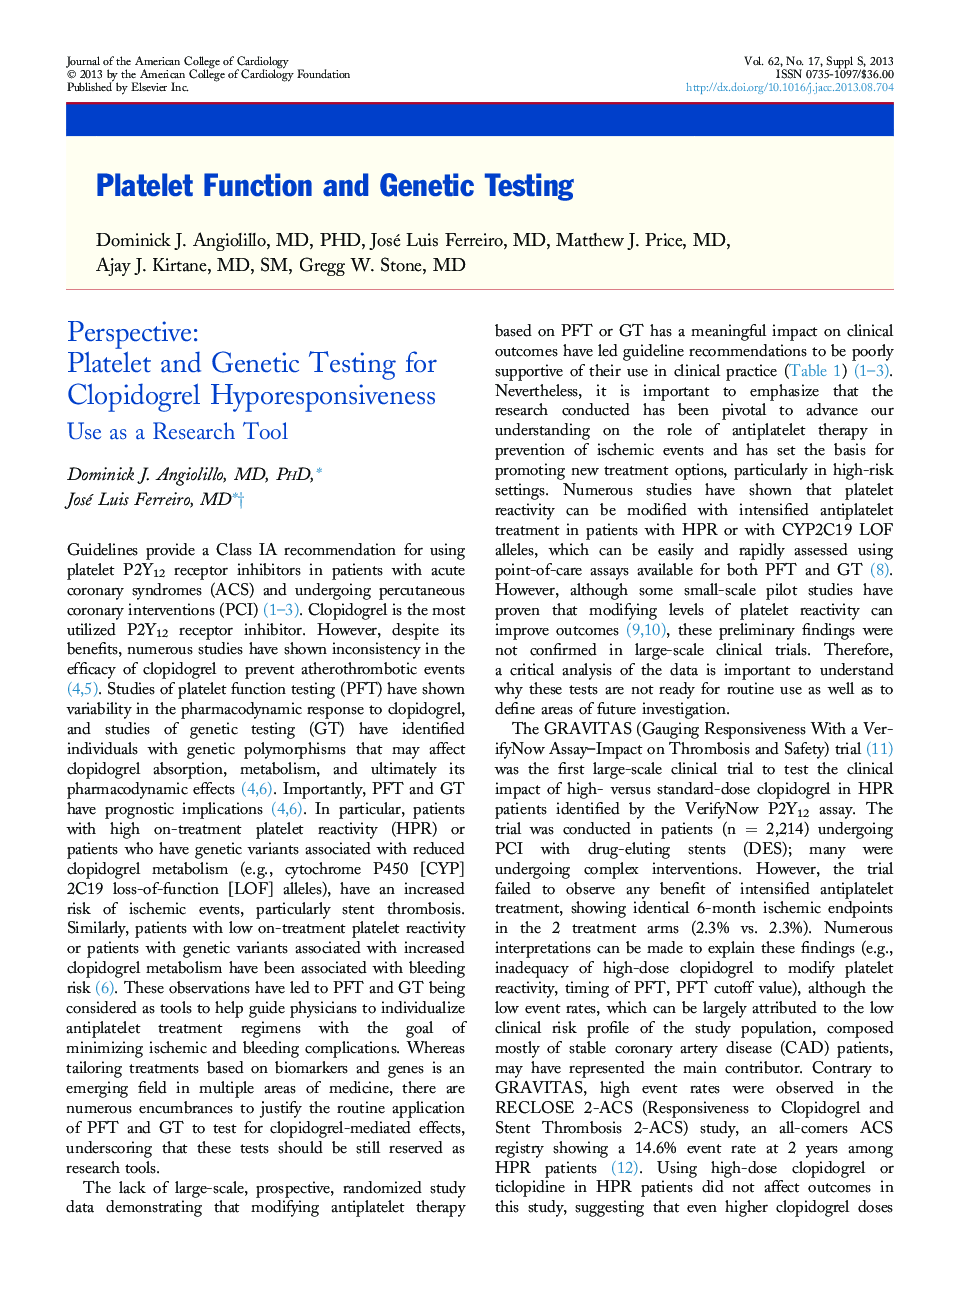 Platelet Function and Genetic Testing